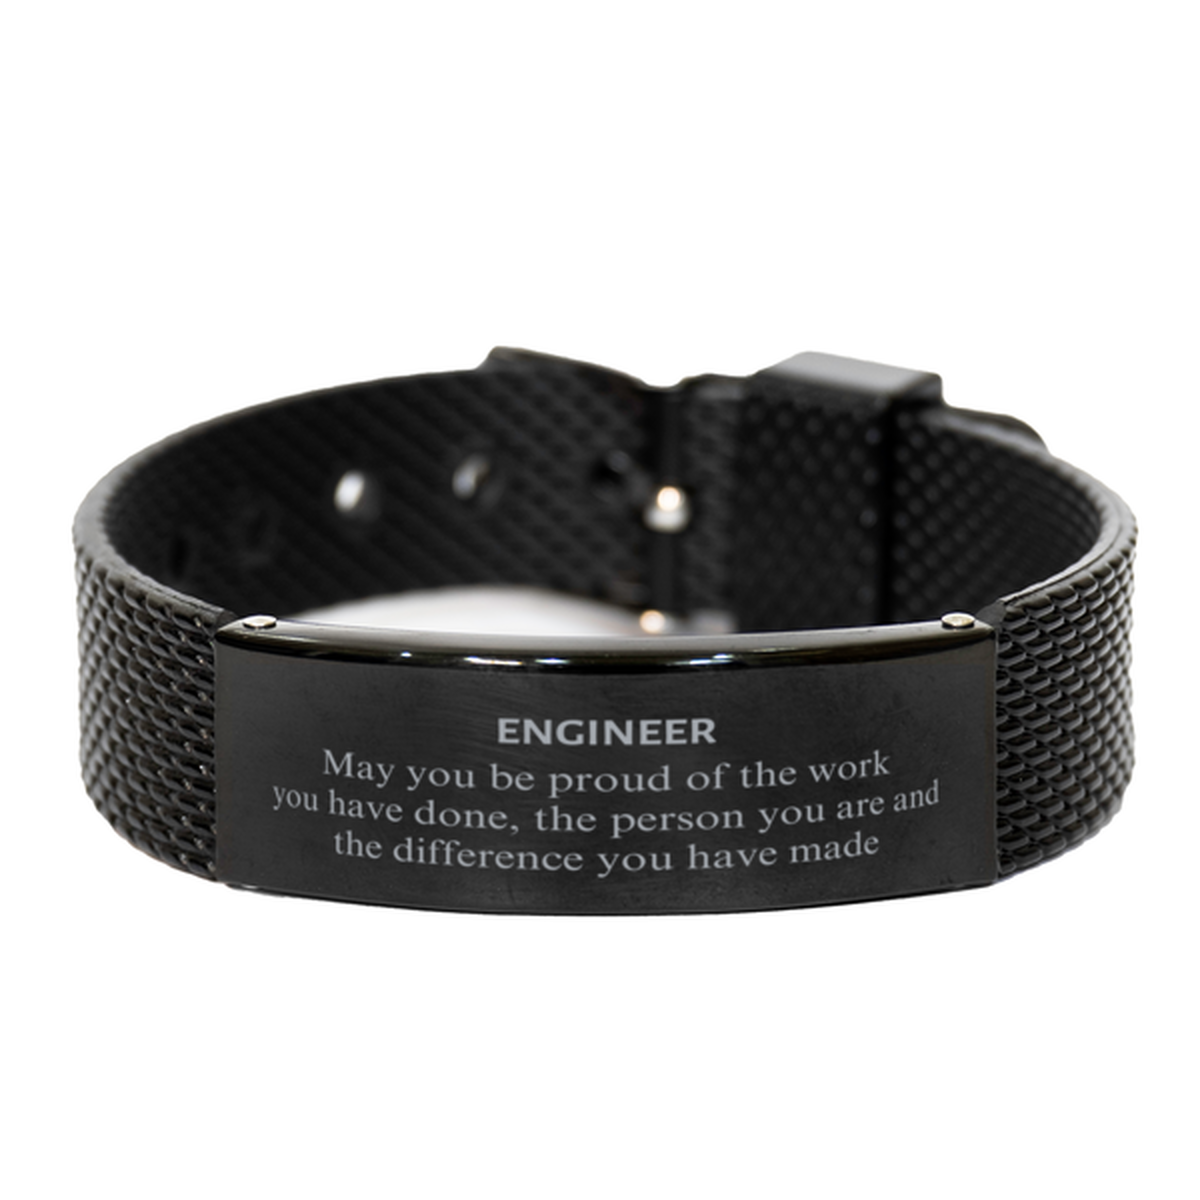 Engineer May you be proud of the work you have done, Retirement Engineer Black Shark Mesh Bracelet for Colleague Appreciation Gifts Amazing for Engineer